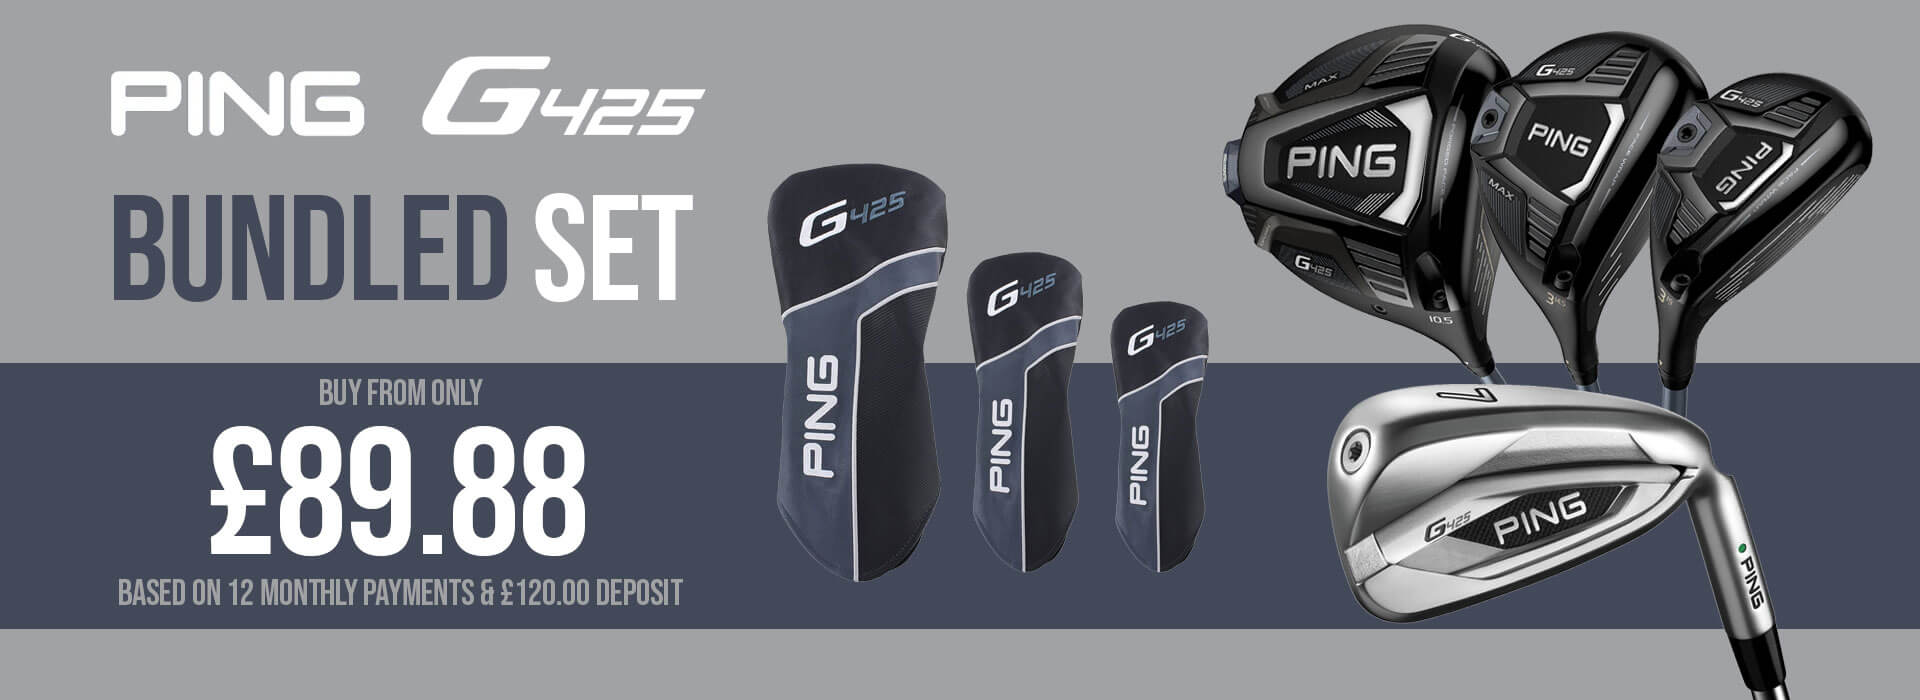 Ping G425 Max Package Set Banner